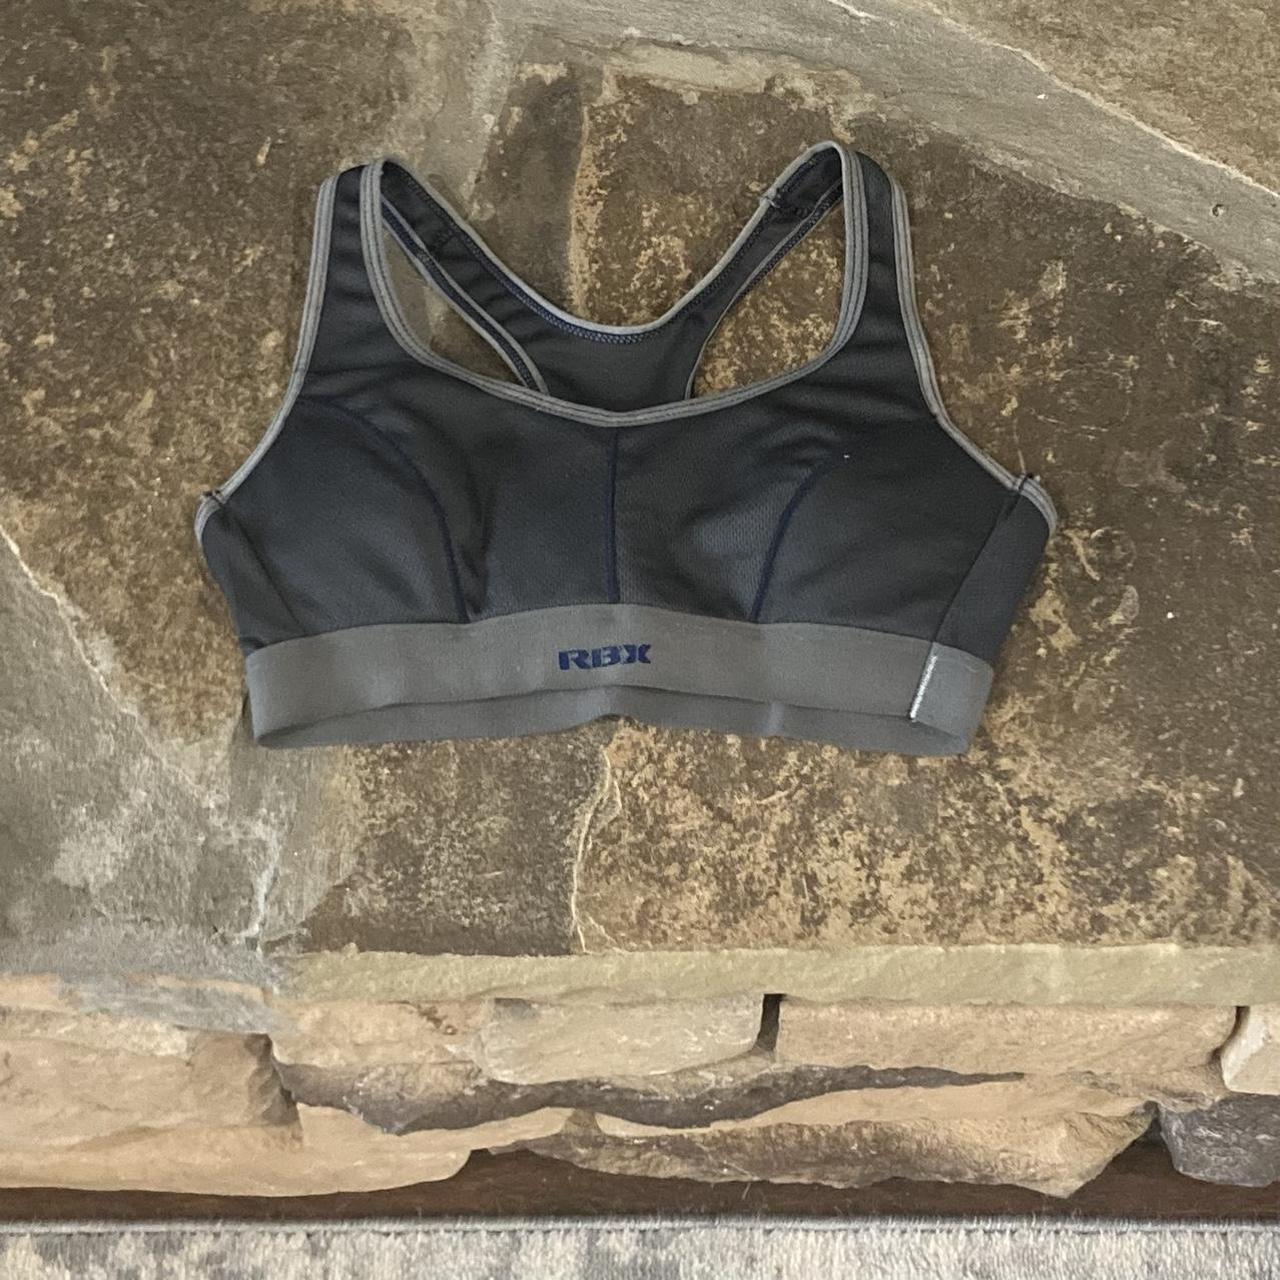 Grey RBX sports bra 🩶 - perfect for working out and - Depop